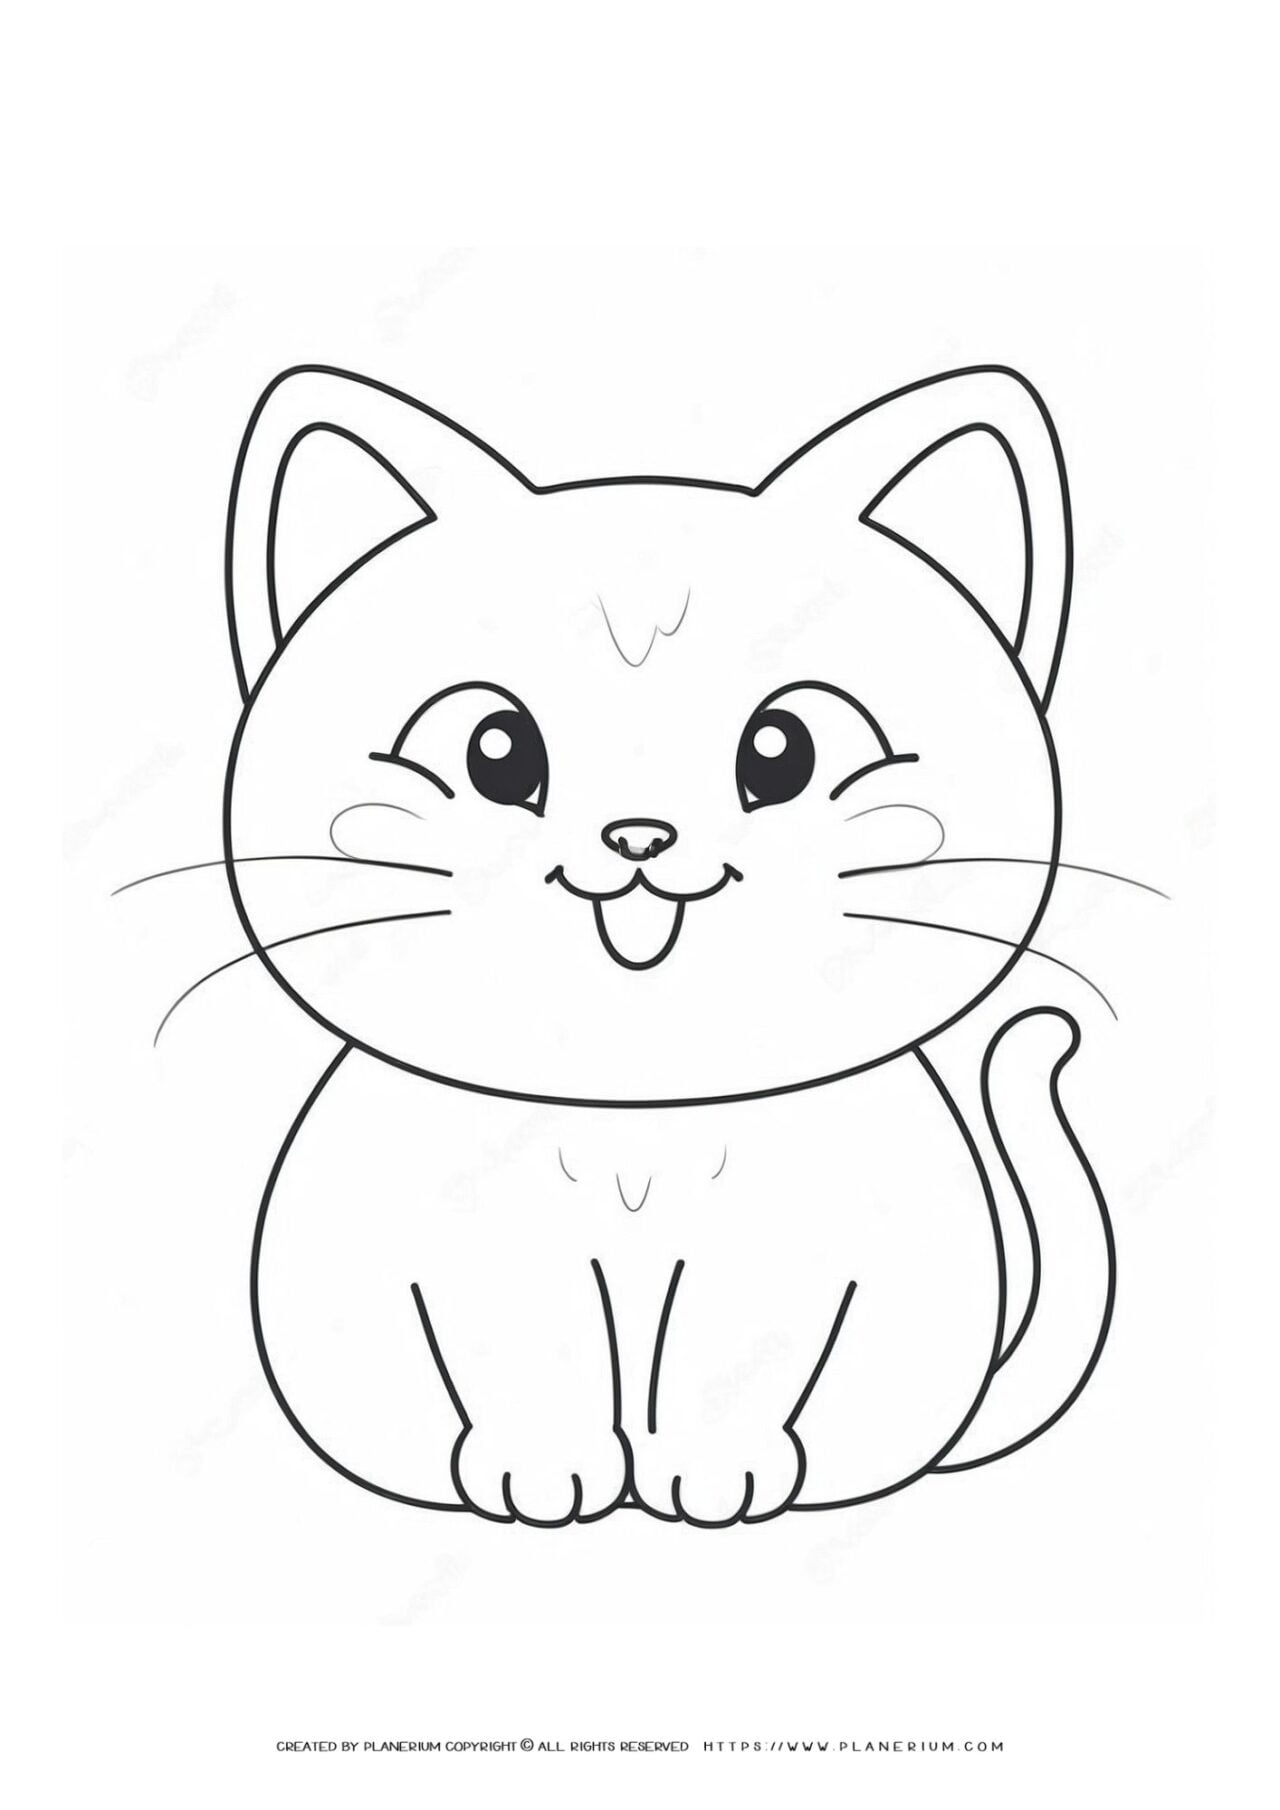 Cute cartoon cat coloring page illustration.